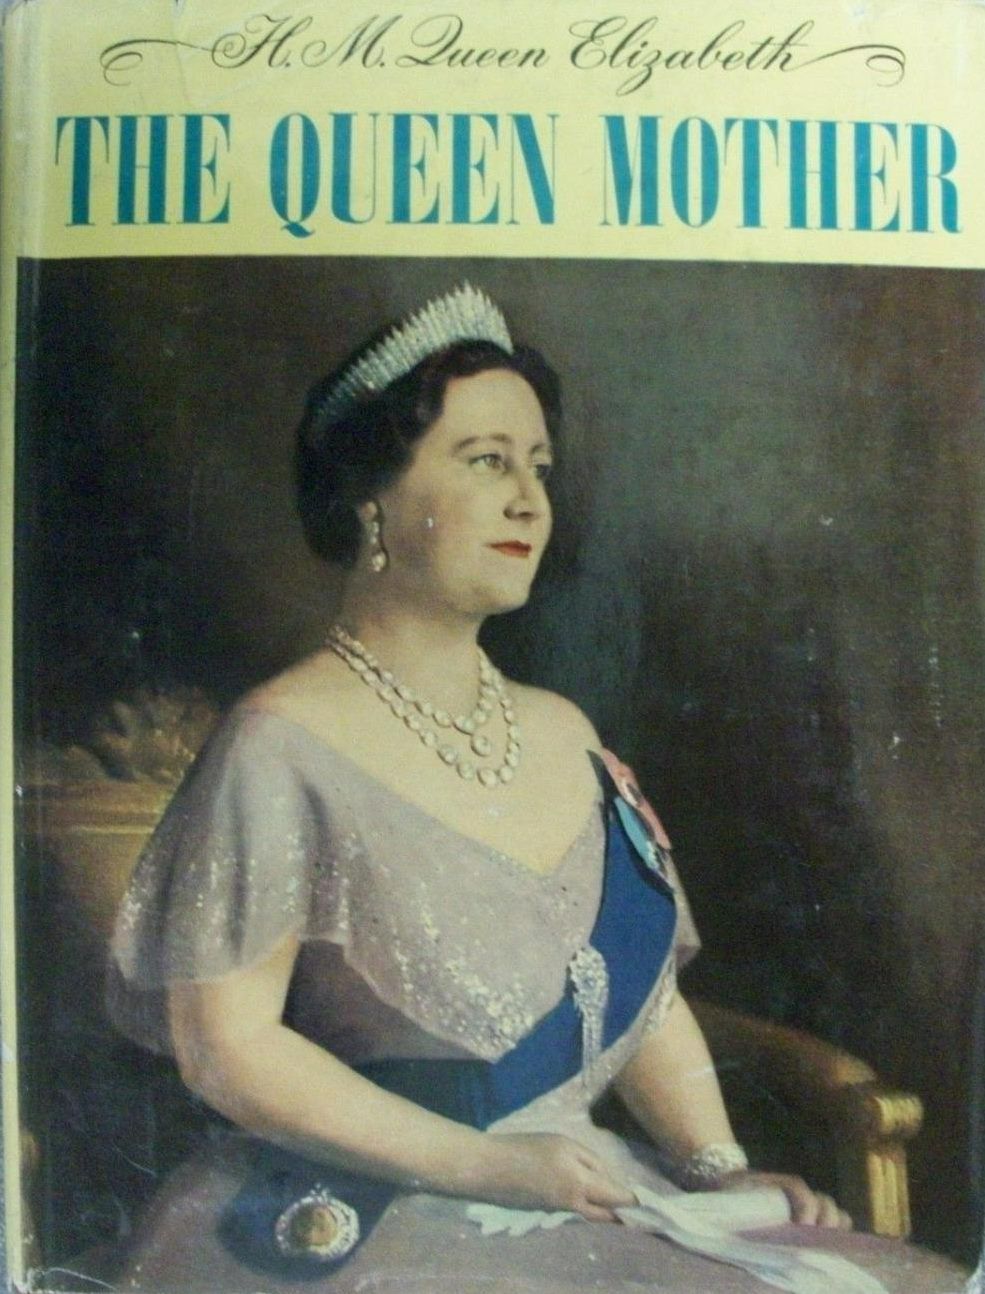 QUEEN ELIZABETH The Queen Mother - an illustrated story